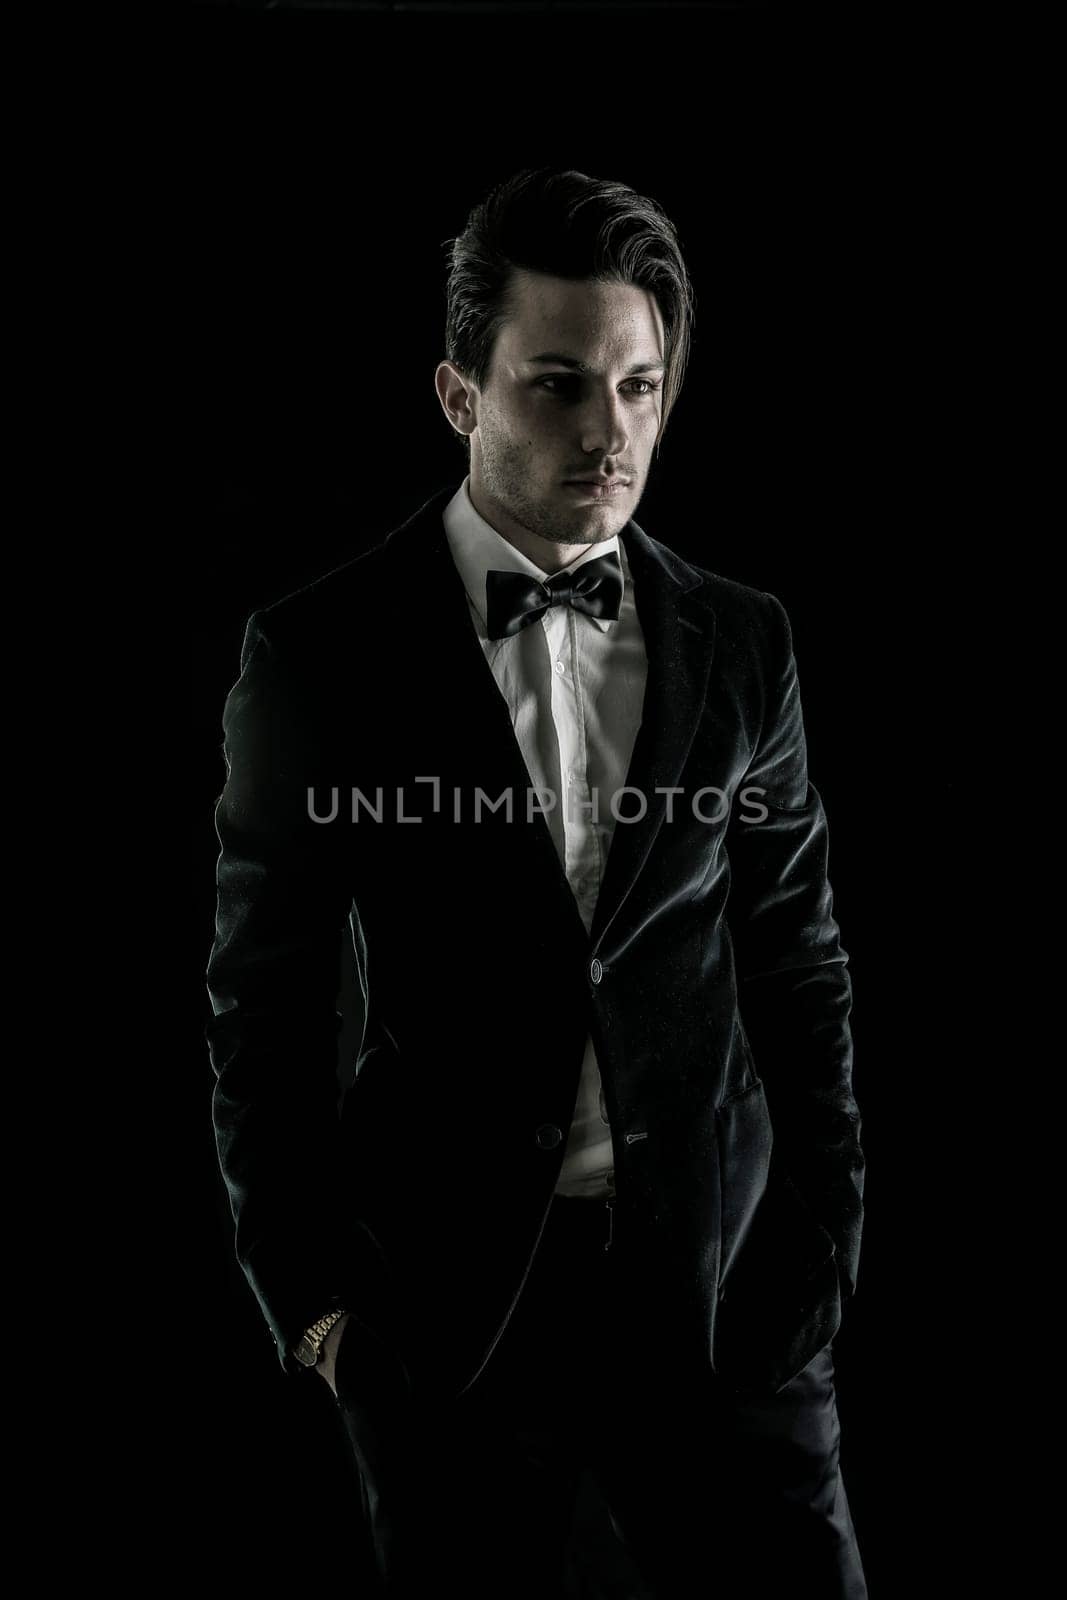 A man in a tuxedo poses for a picture